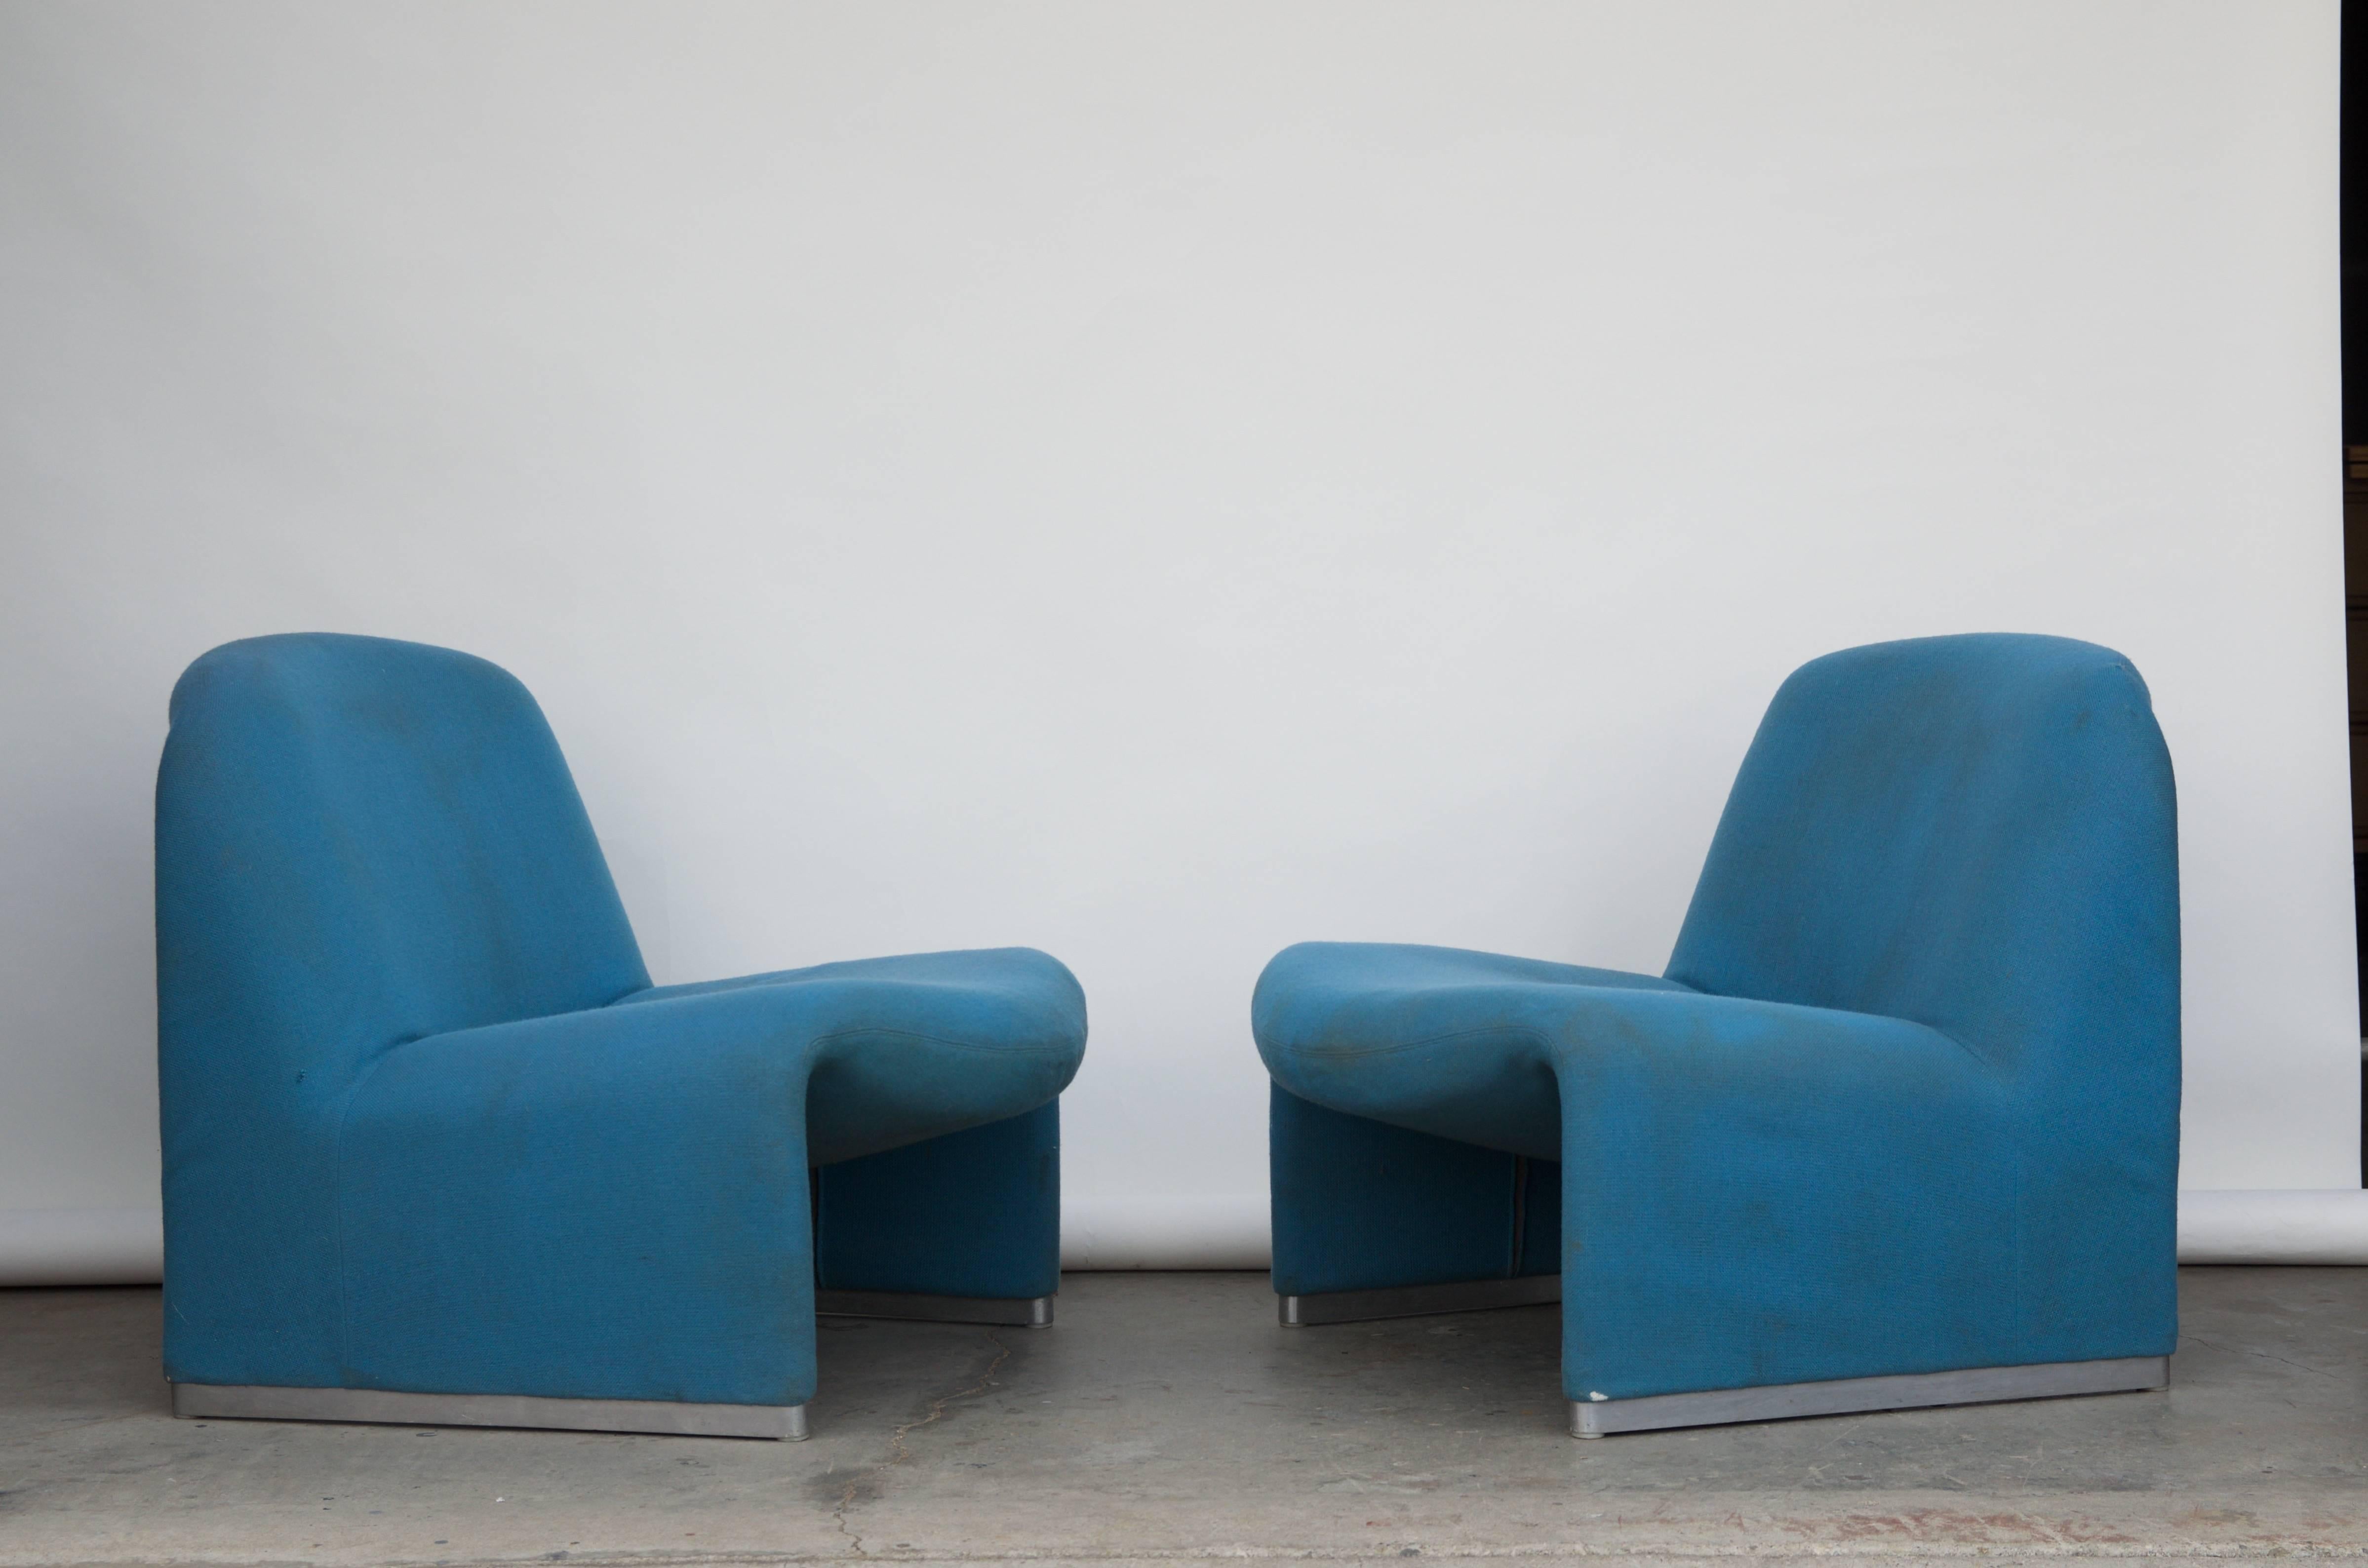 Pair of Original Alky Lounge Chairs by Giancarlo Piretti for Castelli 1